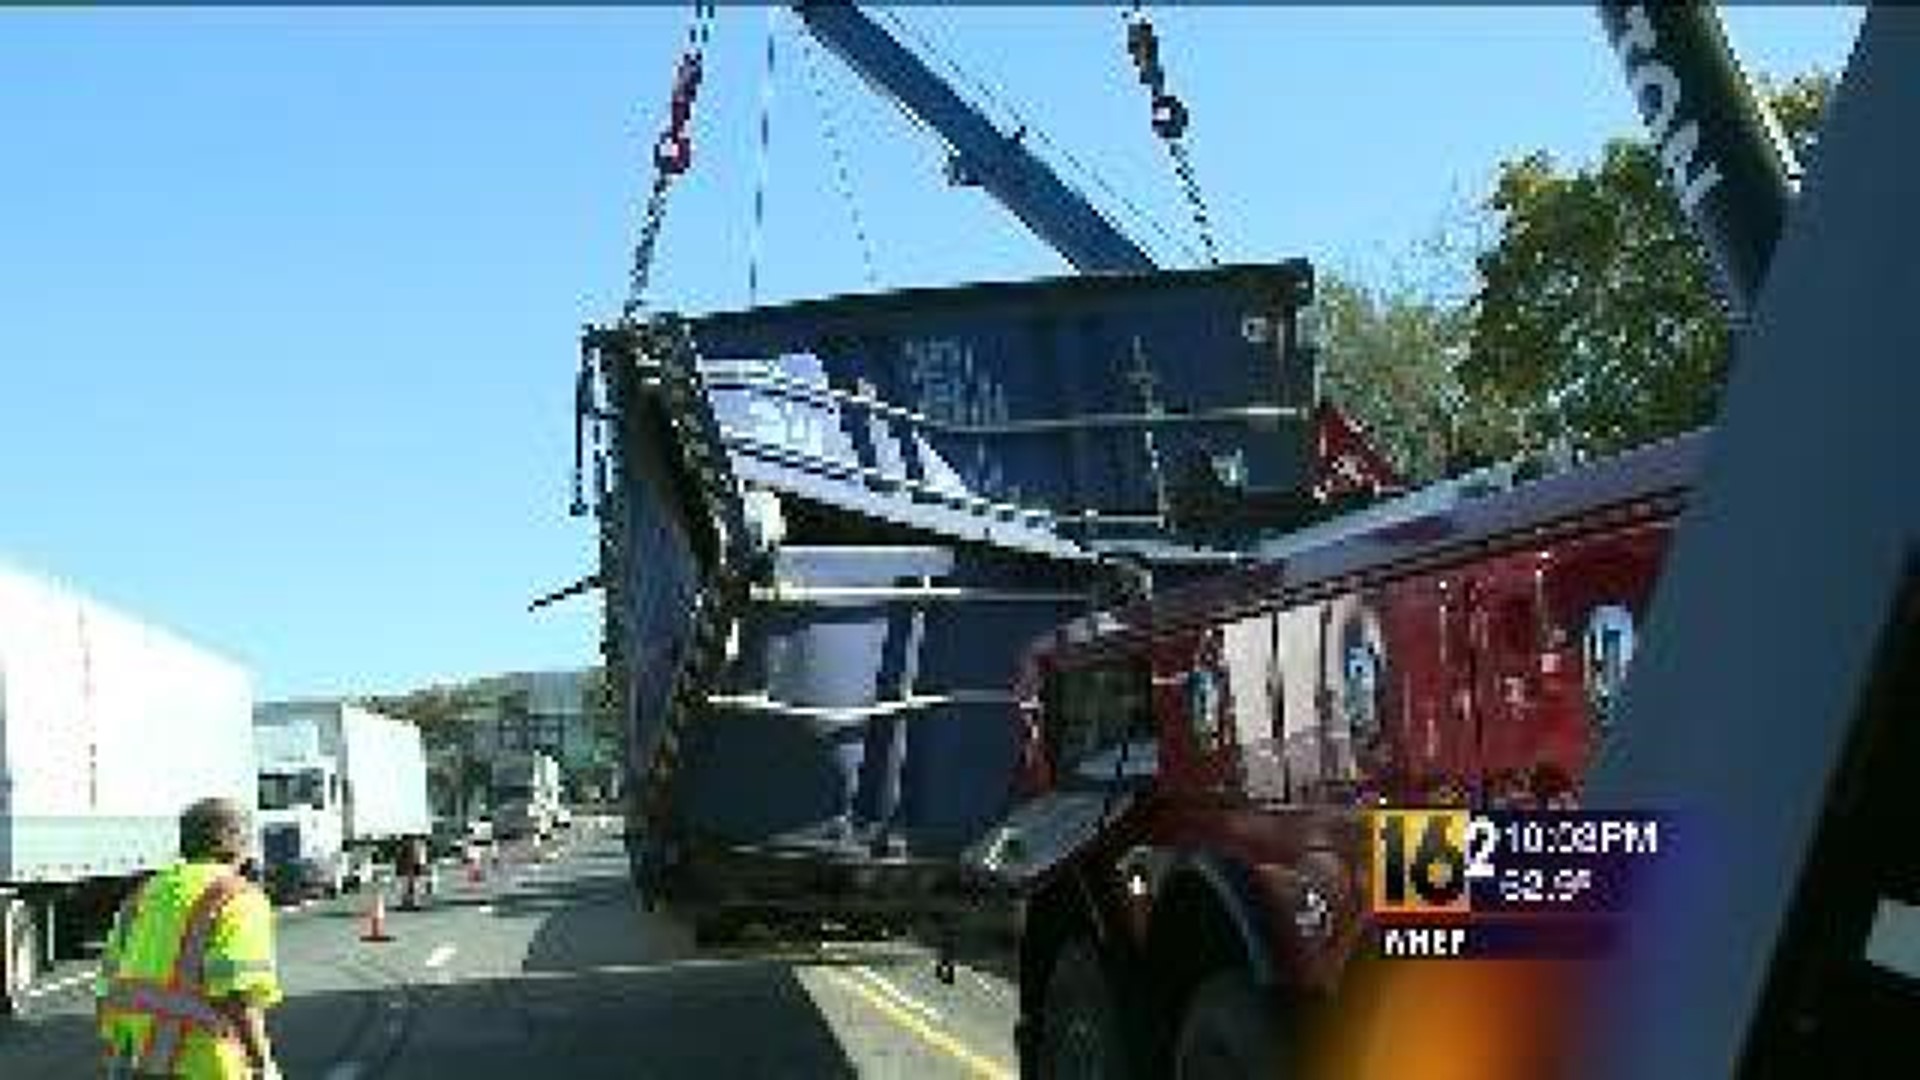 Two Truck Crashes in Two Days